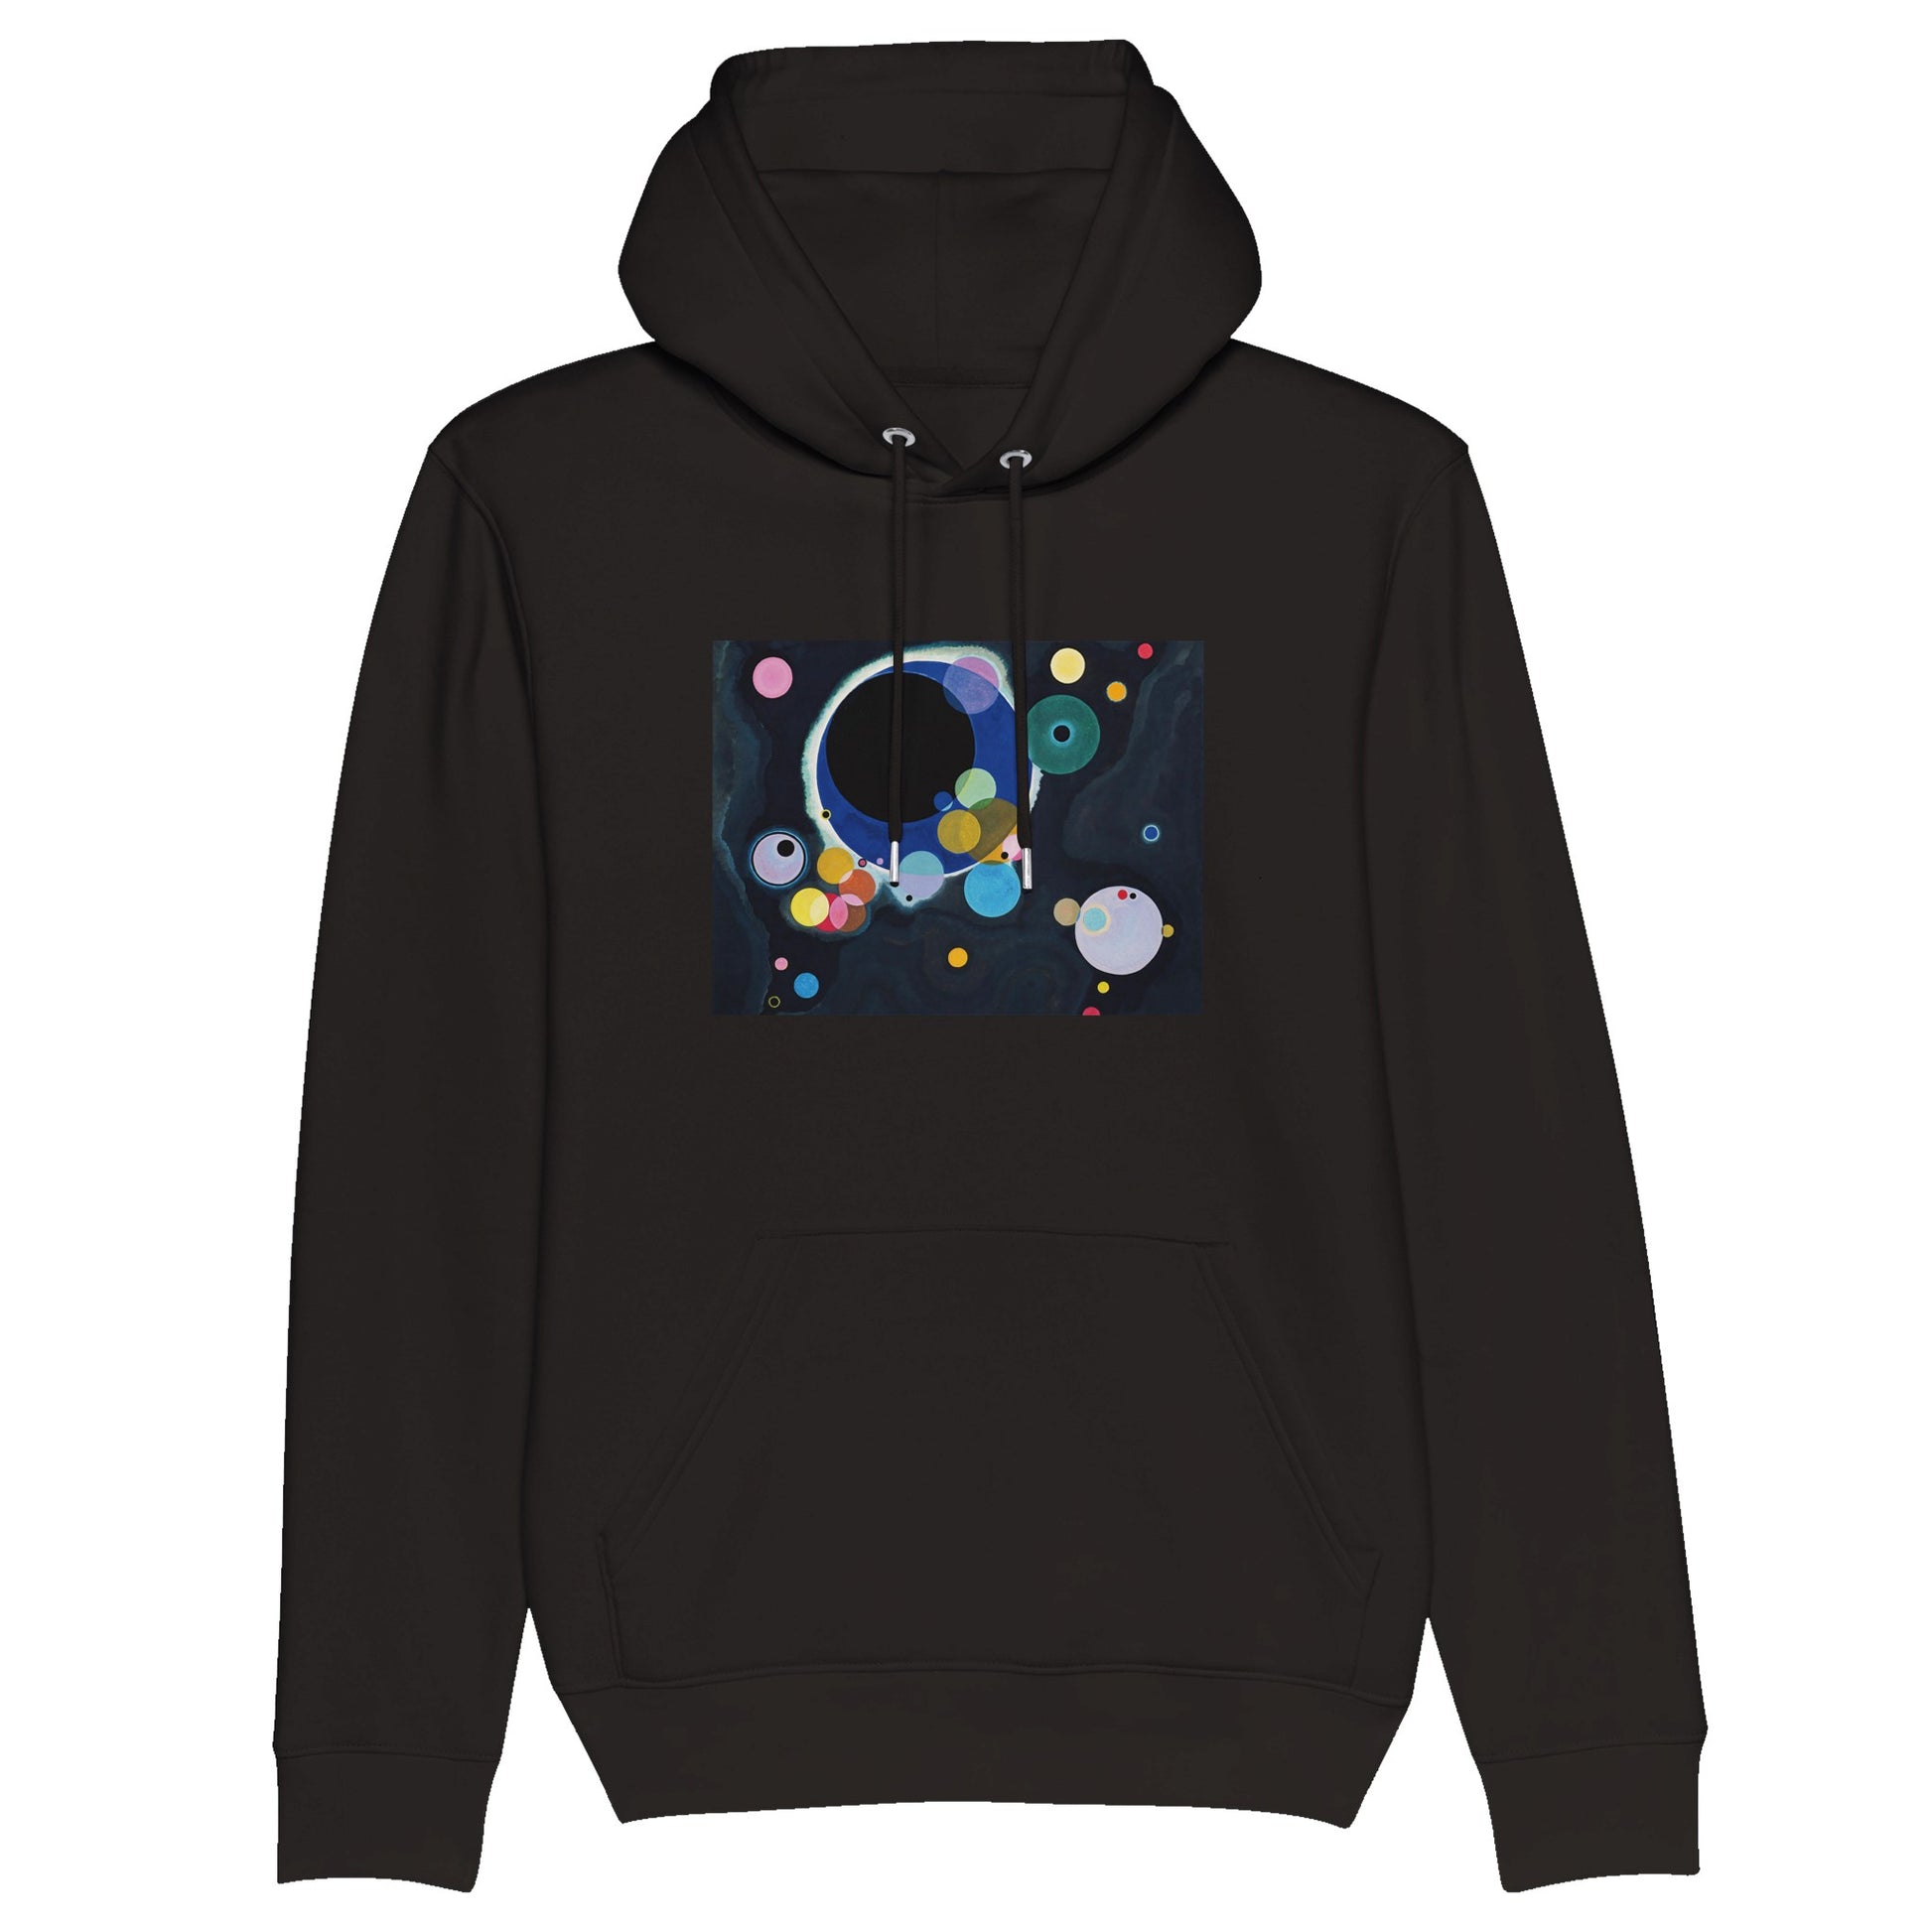 WASSILY KANDINSKY - SEVERAL CIRCLES - ORGANIC UNISEX PULLOVER HOODIE